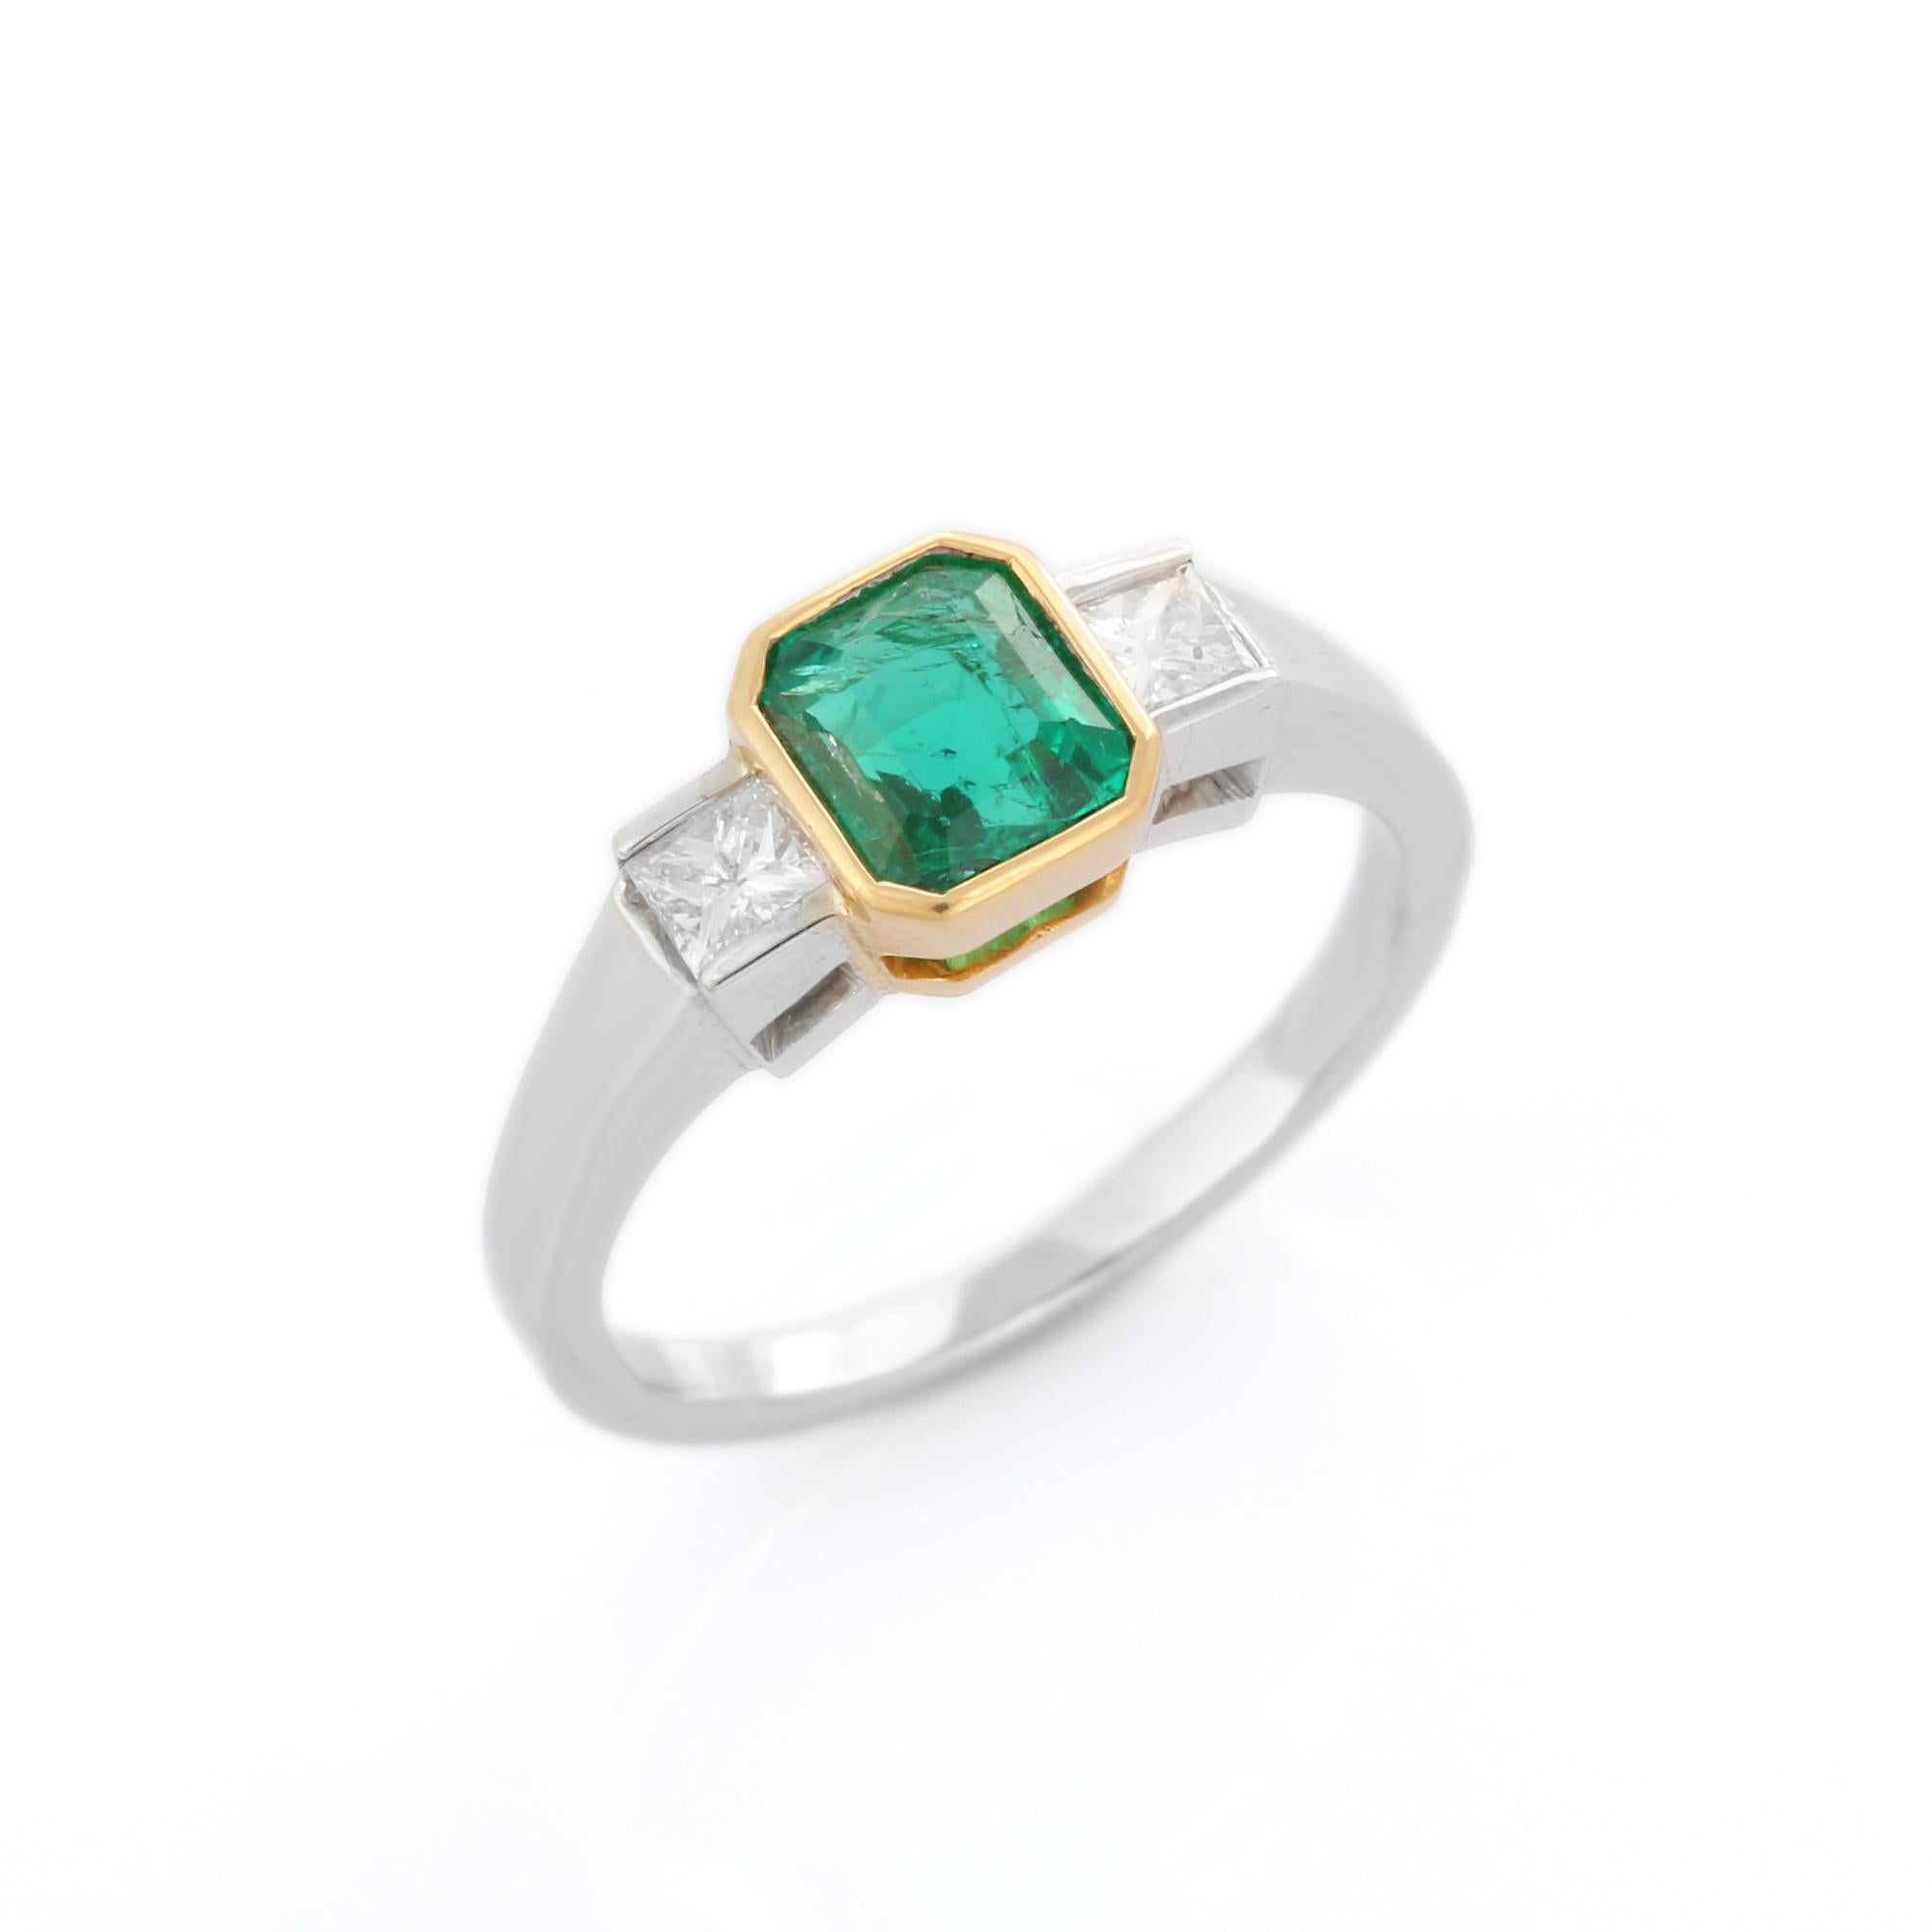 For Sale:  1.61 Carat Octagon Cut Emerald and Diamond Three Stone Ring in 18K White Gold 2